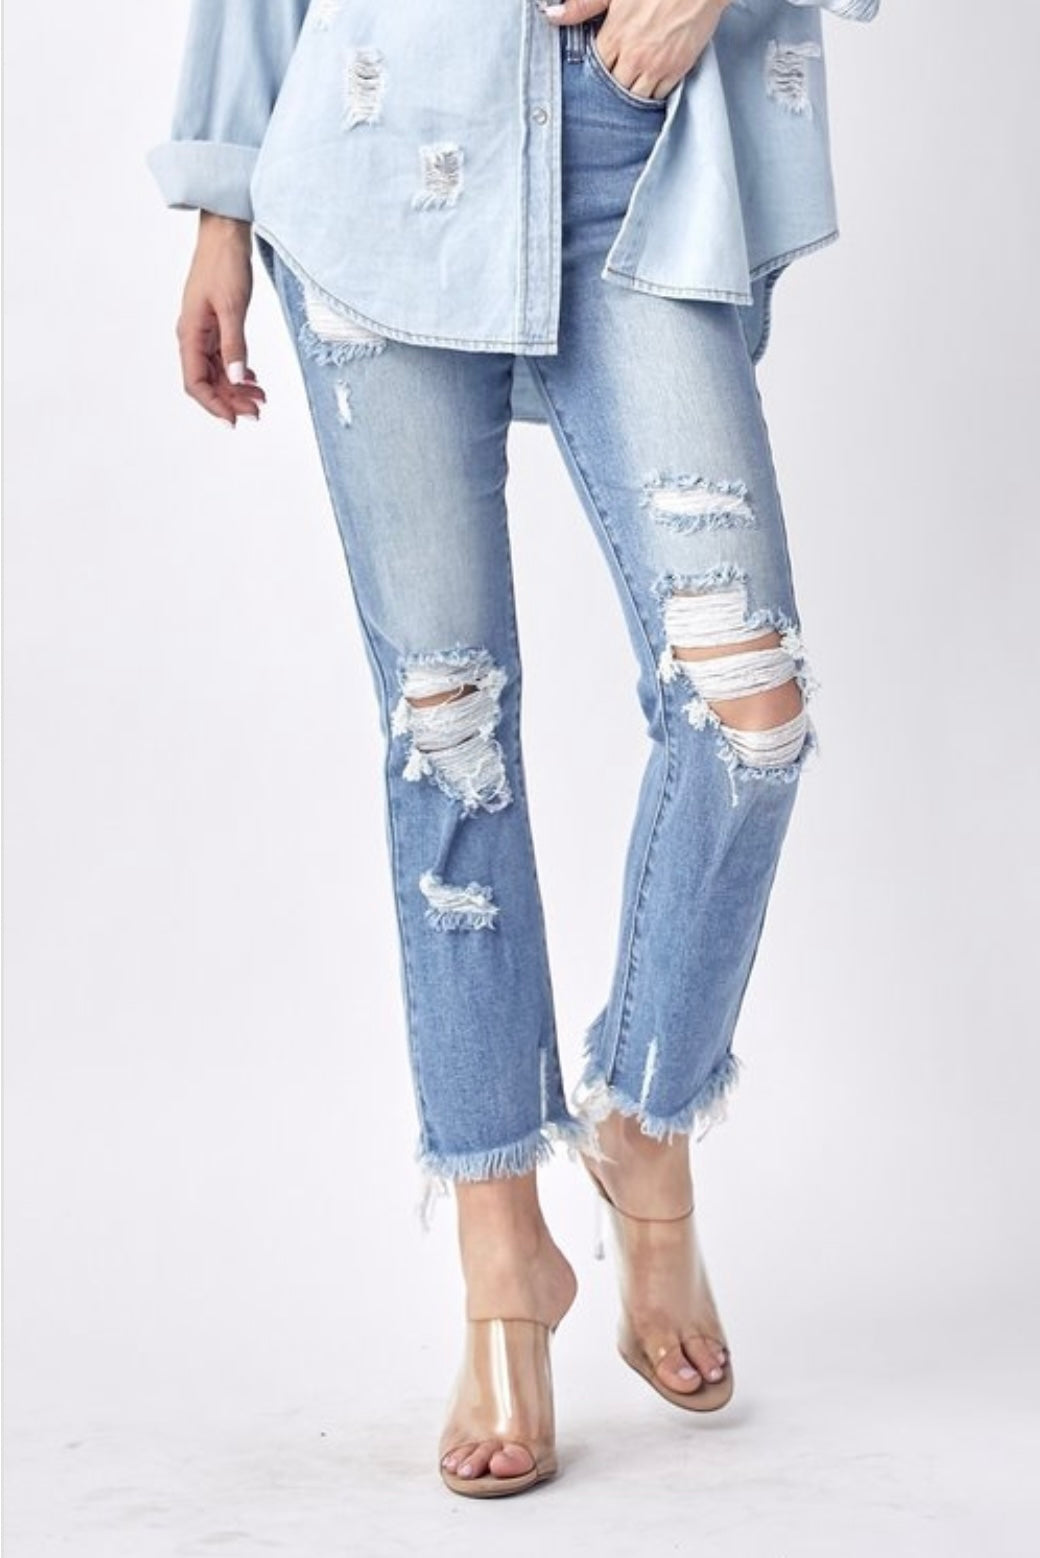 Harper High Rise Vintage Jeans - Corinne Boutique Family Owned and Operated USA